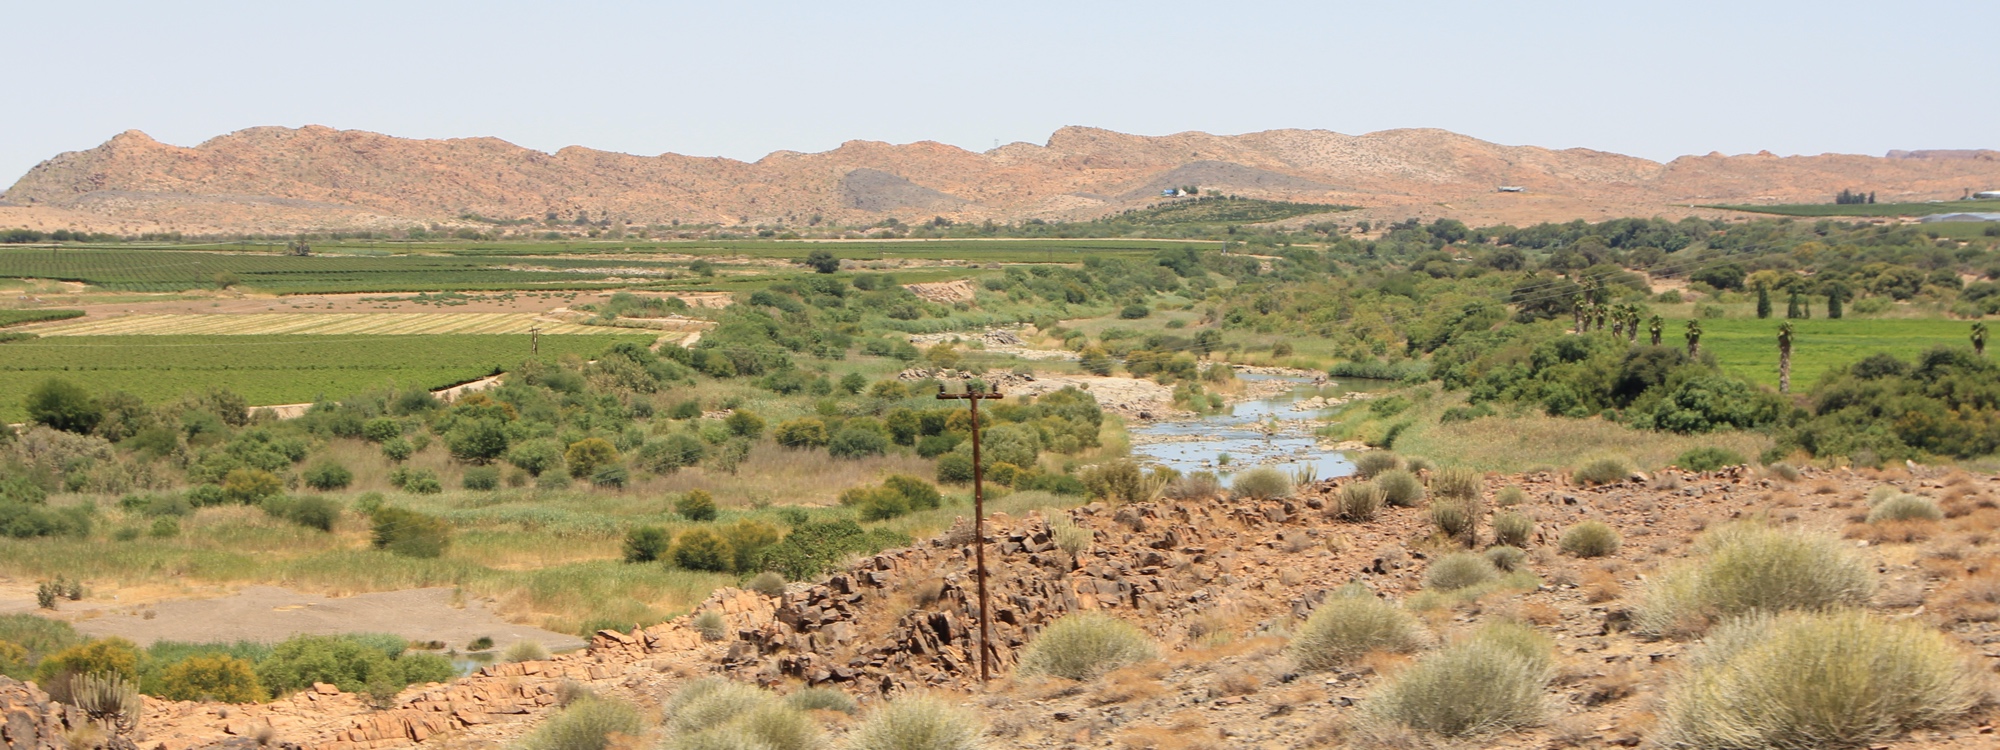 The Orange River with irrigated fields on either side.